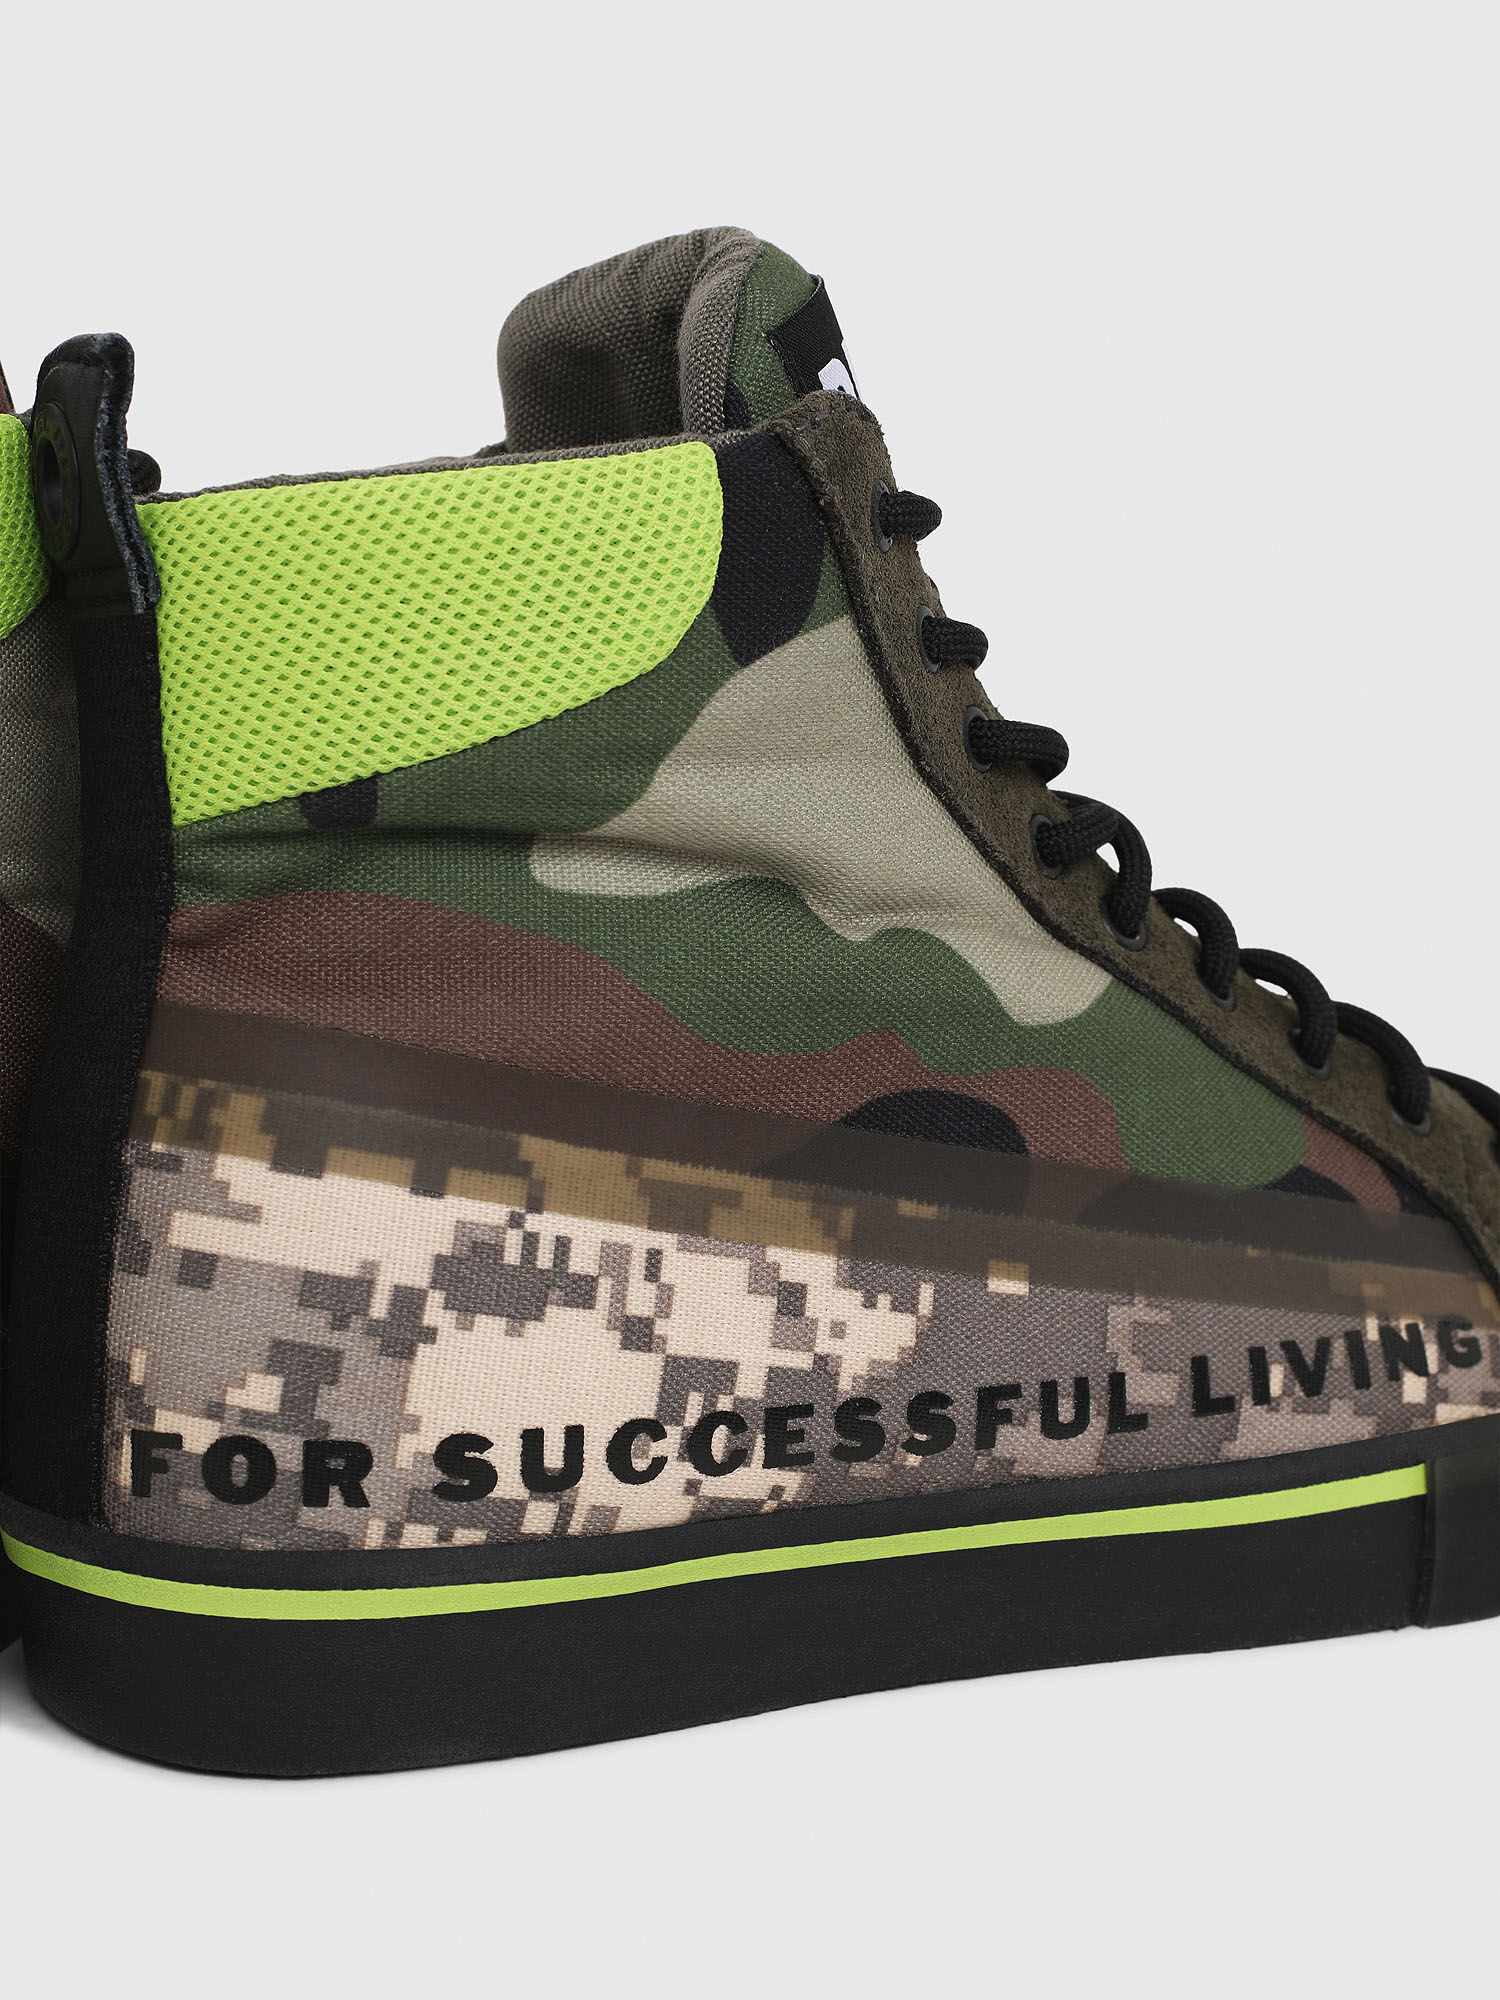 diesel camouflage shoes